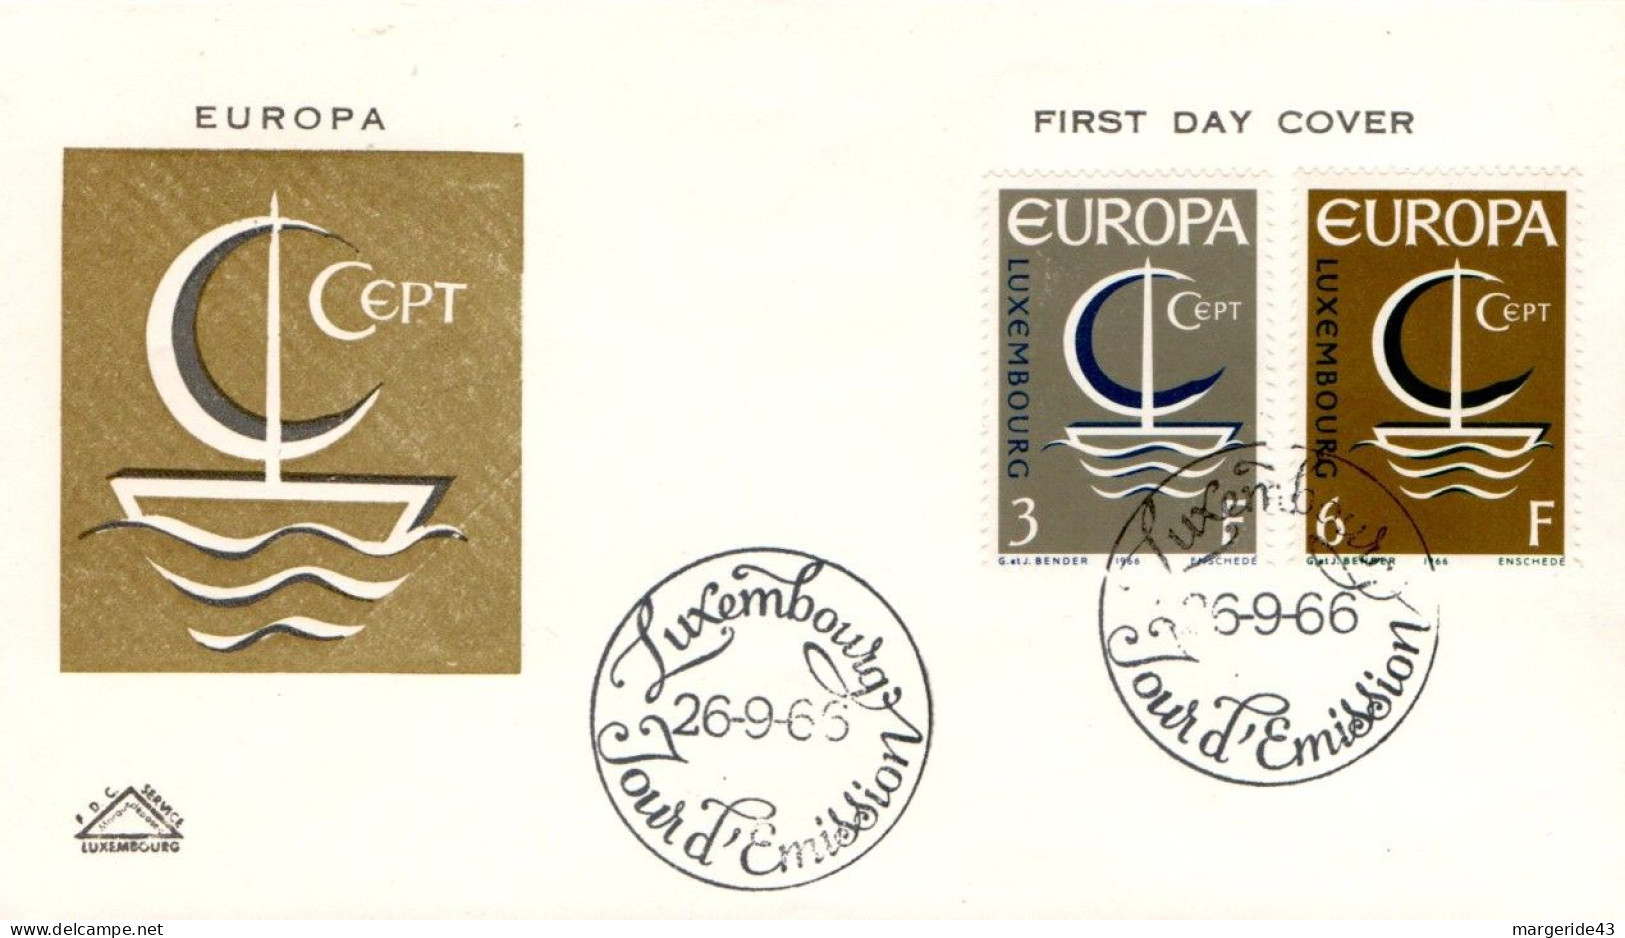 EUROPA FDC 1966 LUXEMBOURG - 1966